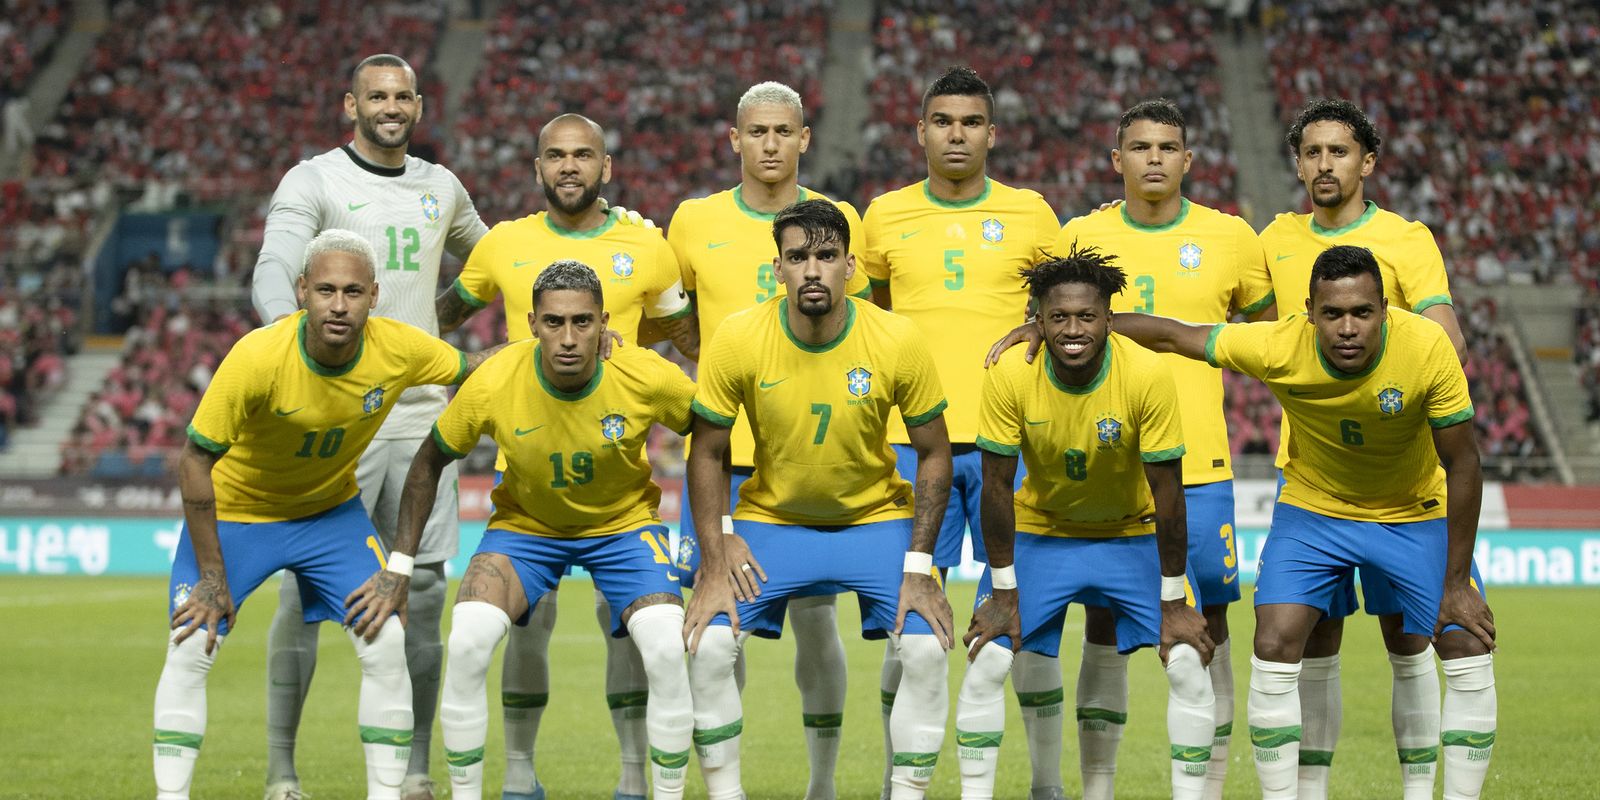 Brazil National Team to play against Ghana and Tunisia in September